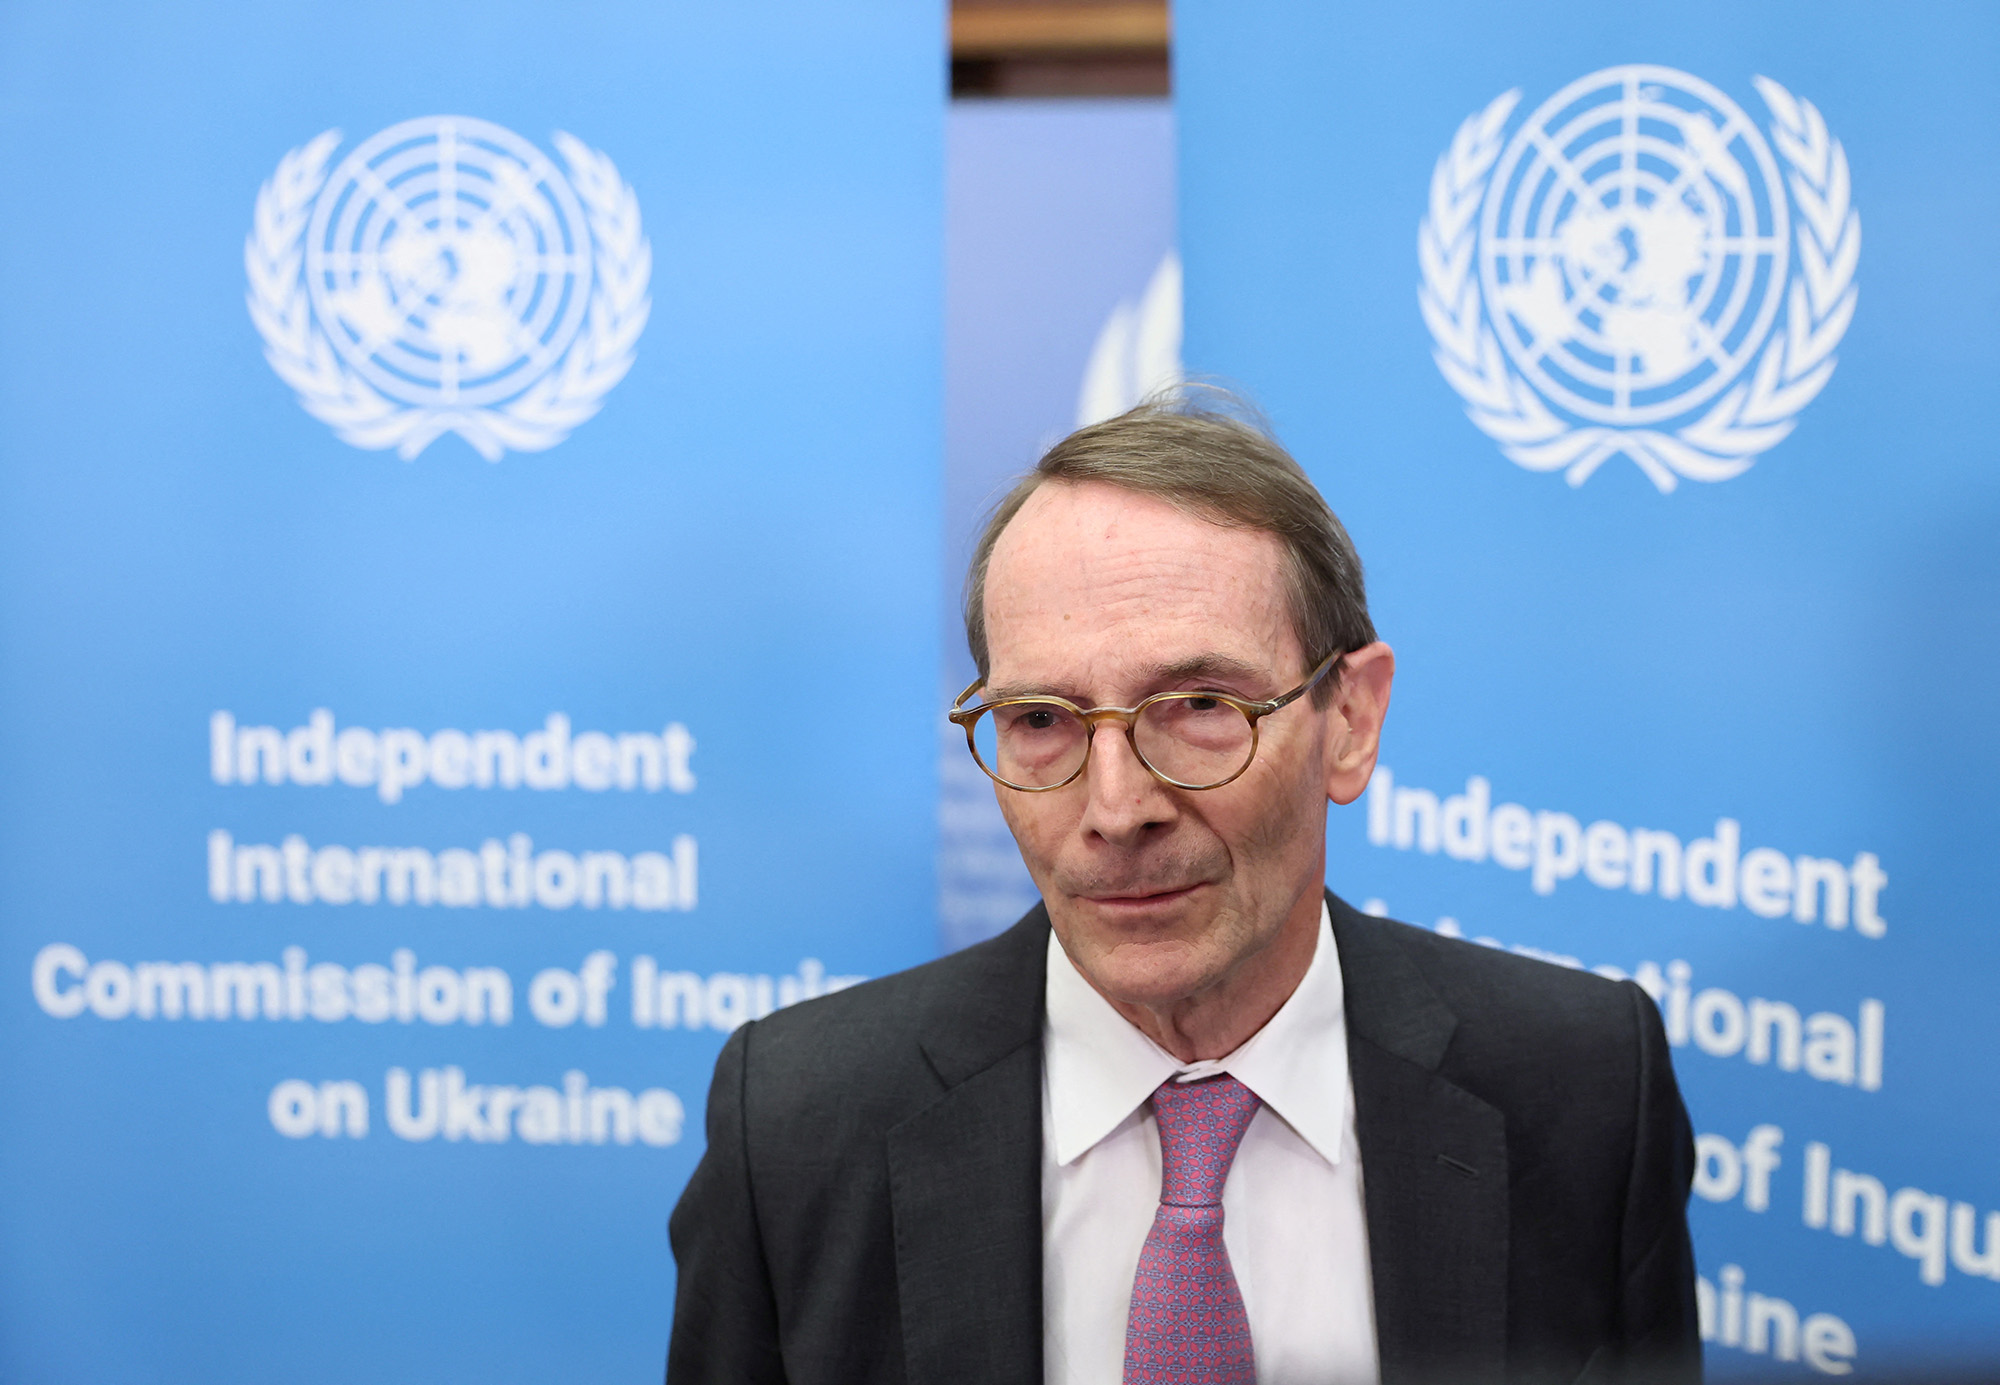 Erik Mose, chairman of the independent international commission of inquiry into Ukraine, takes part in an interview September 23 after a news conference at the United Nations in Geneva, Switzerland.